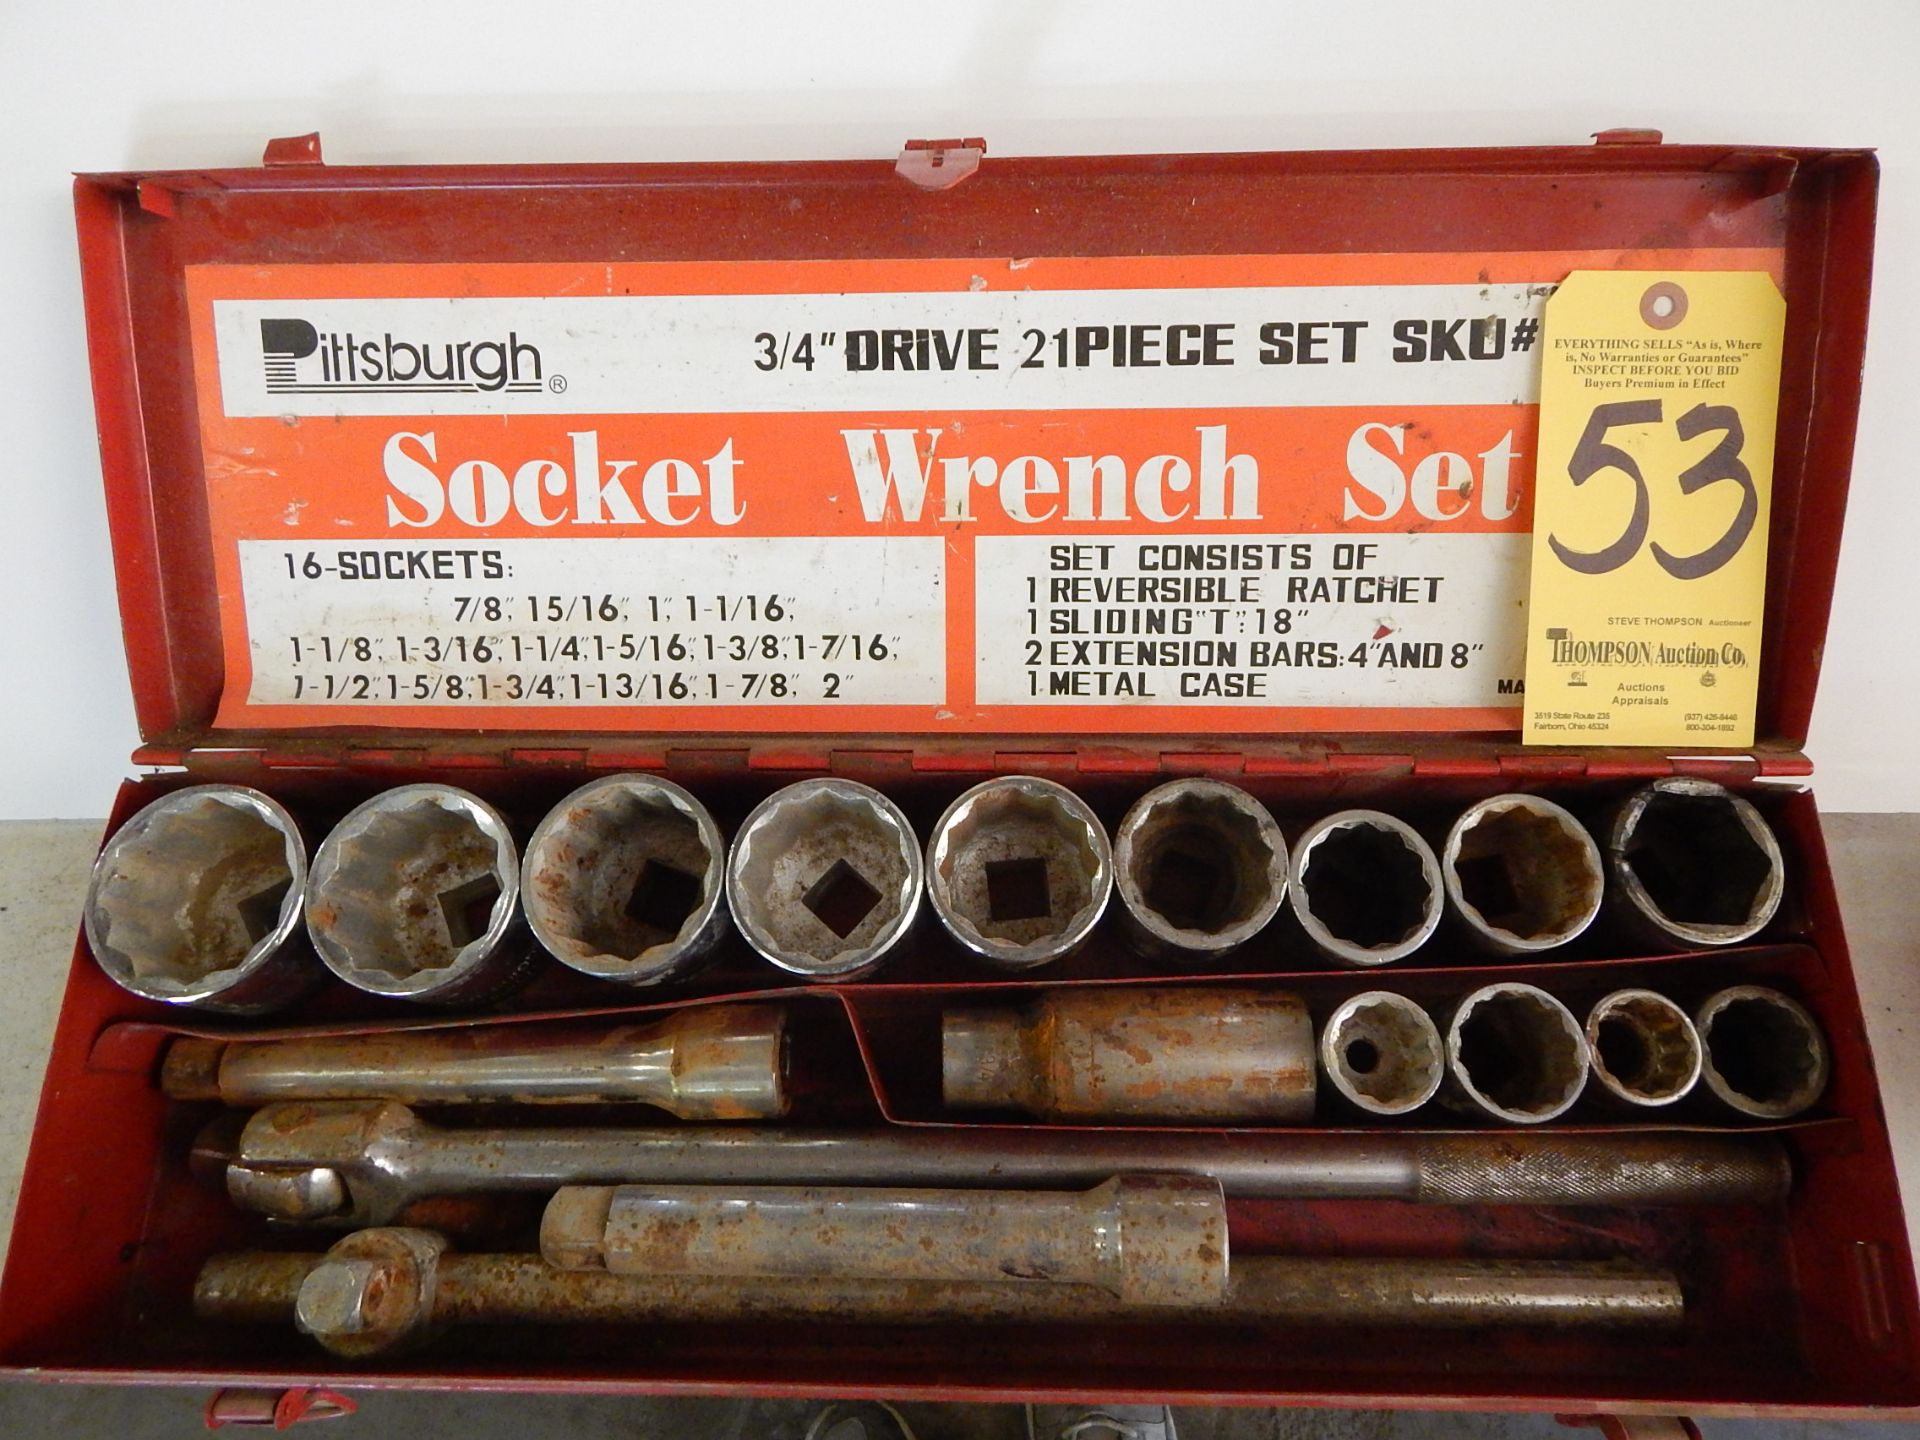 Ratchet and Socket Set, Inch and Metric